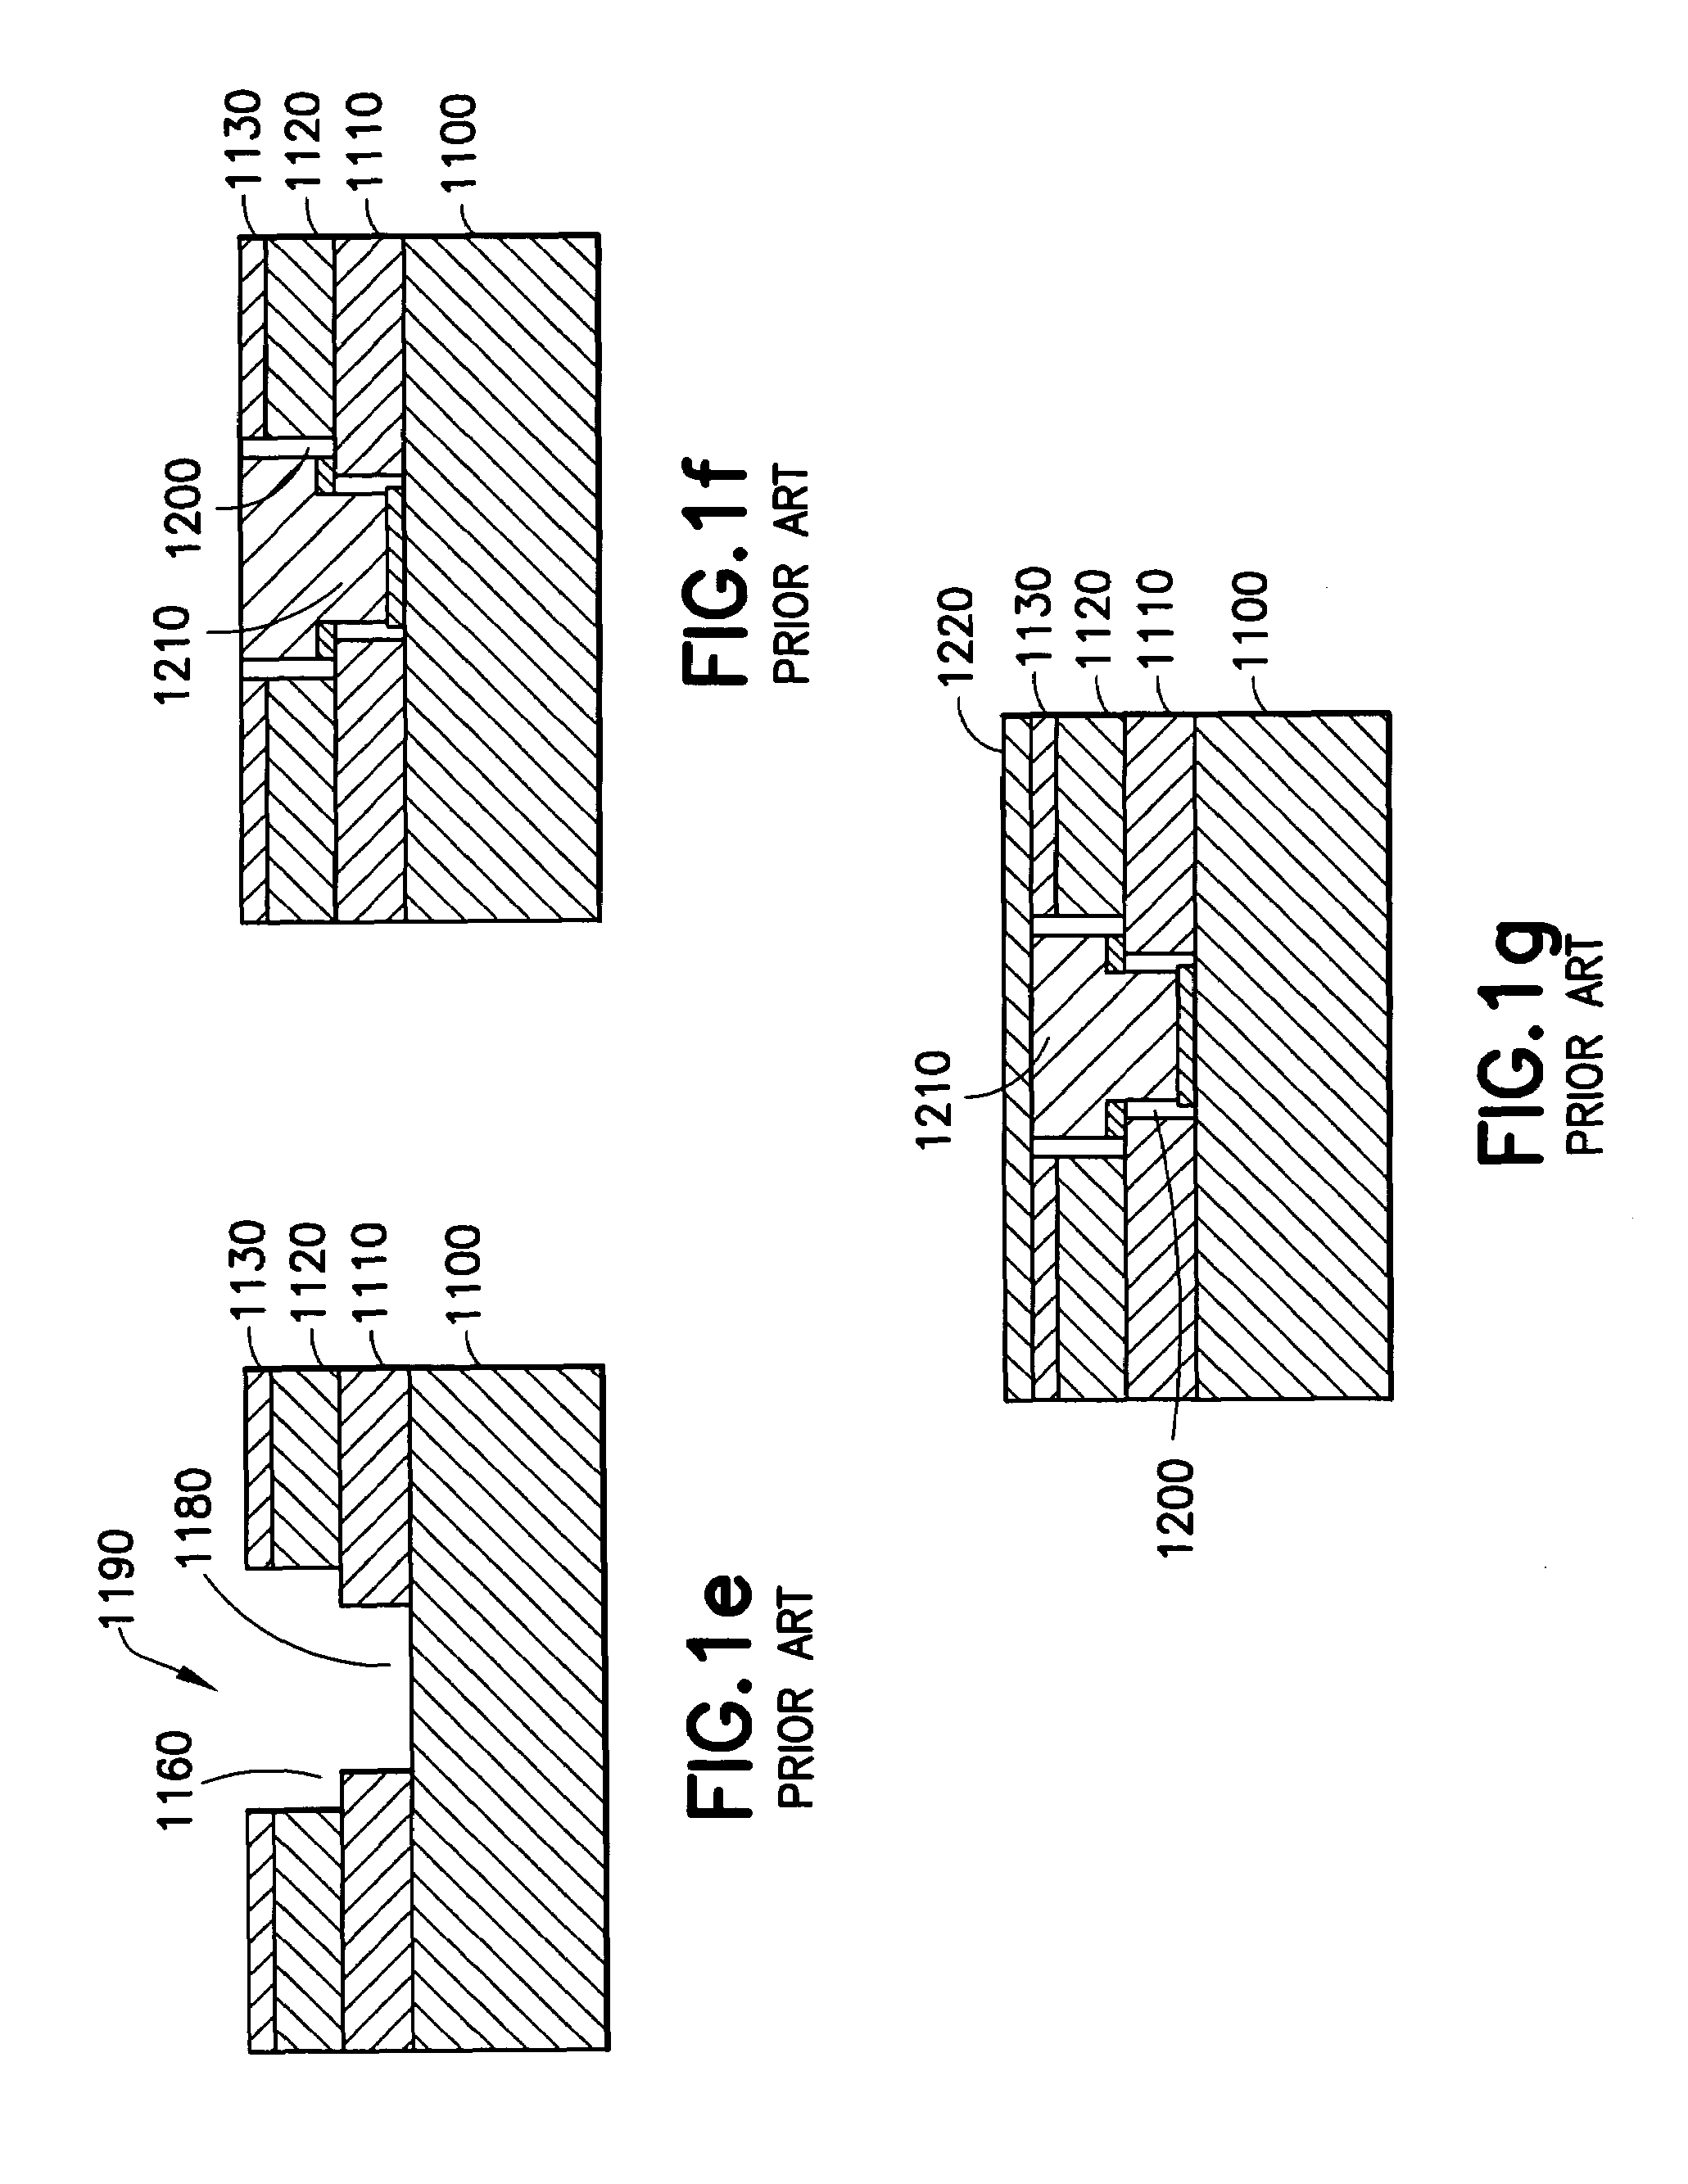 Very low effective dielectric constant interconnect Structures and methods for fabricating the same